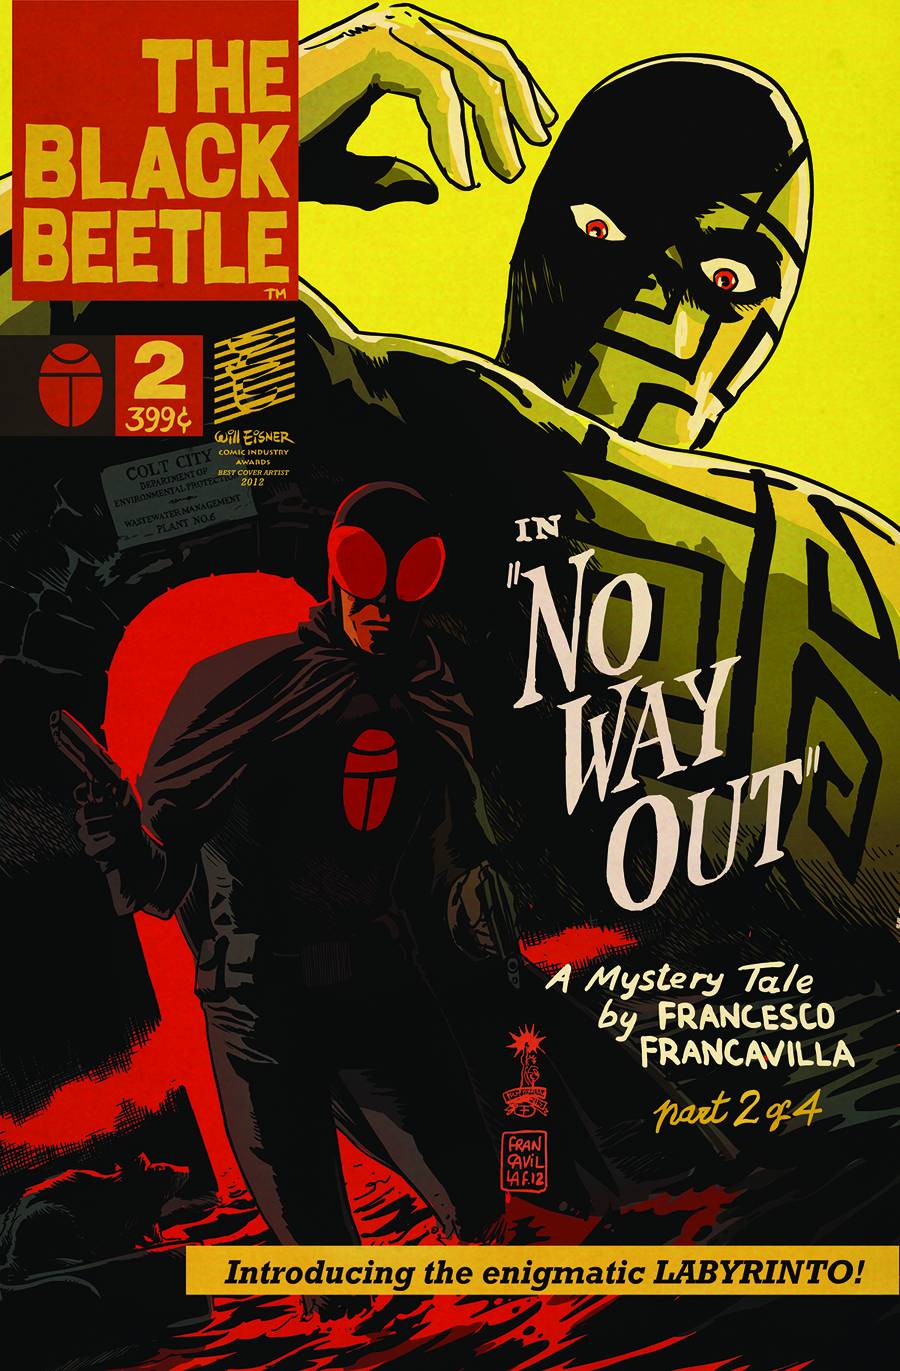 Black Beetle #2 No Way Out